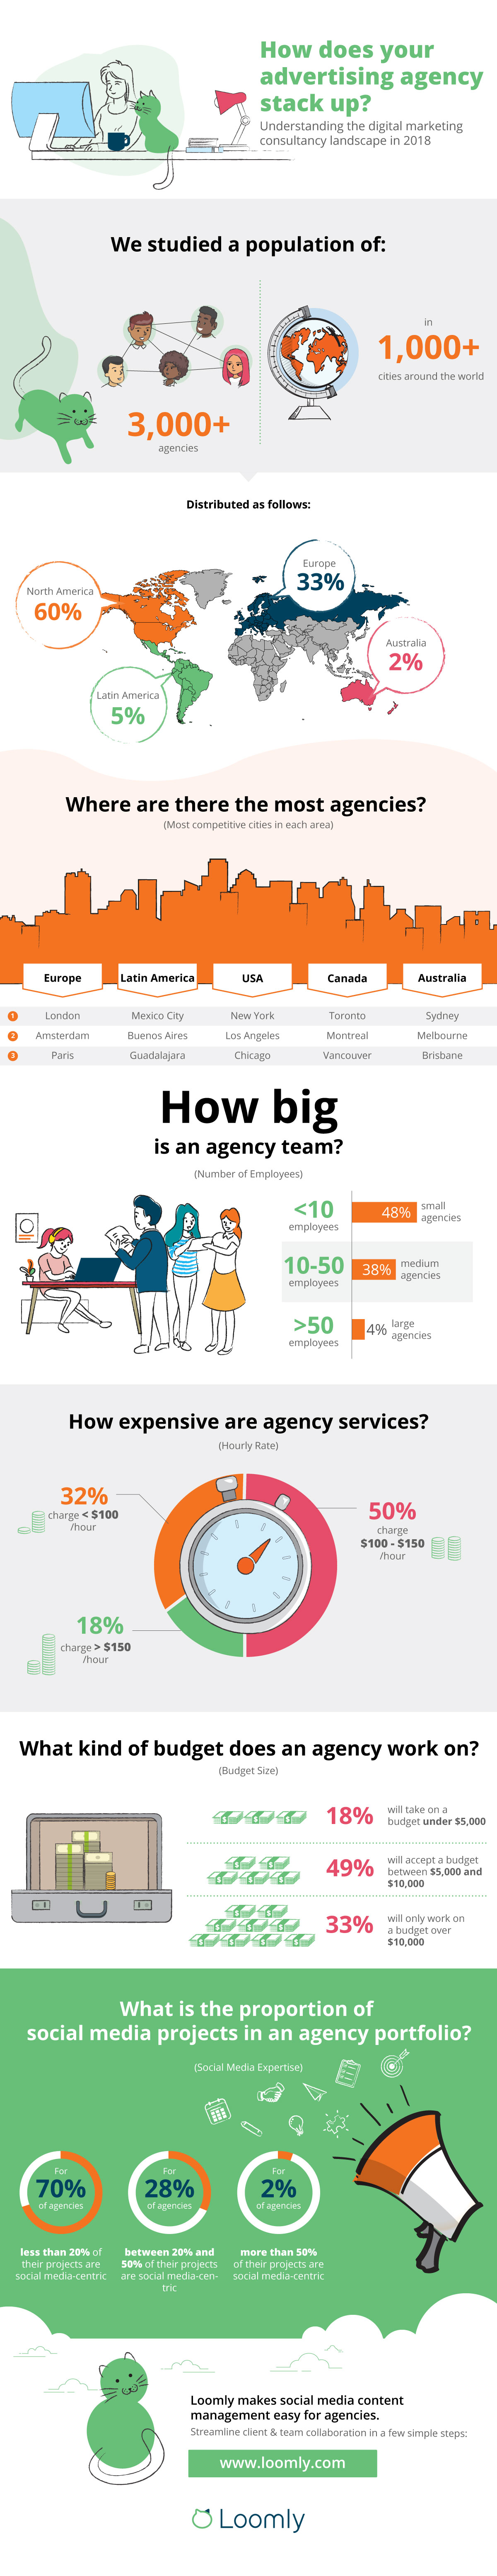 Advertising Agency 2018 Infographic